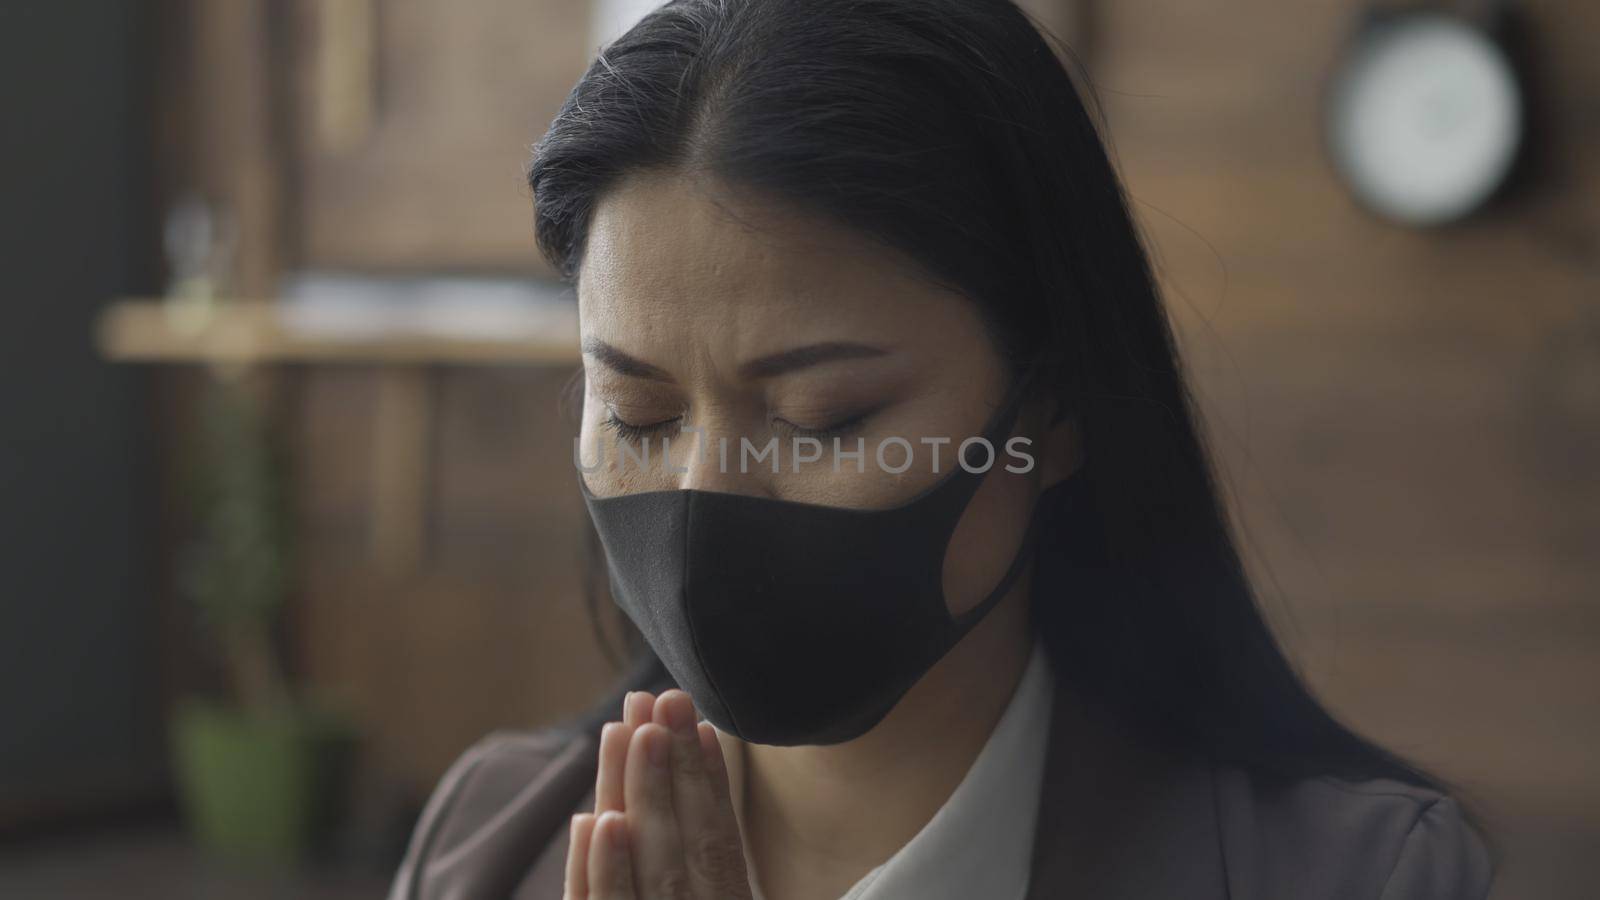 Beautiful Woman In Protective Mask Portrait Of Asian Woman Praying In Office Closing Her Eyes, Business Woman Isolated During Epidemic Of Coronavirus, Close Up Shot